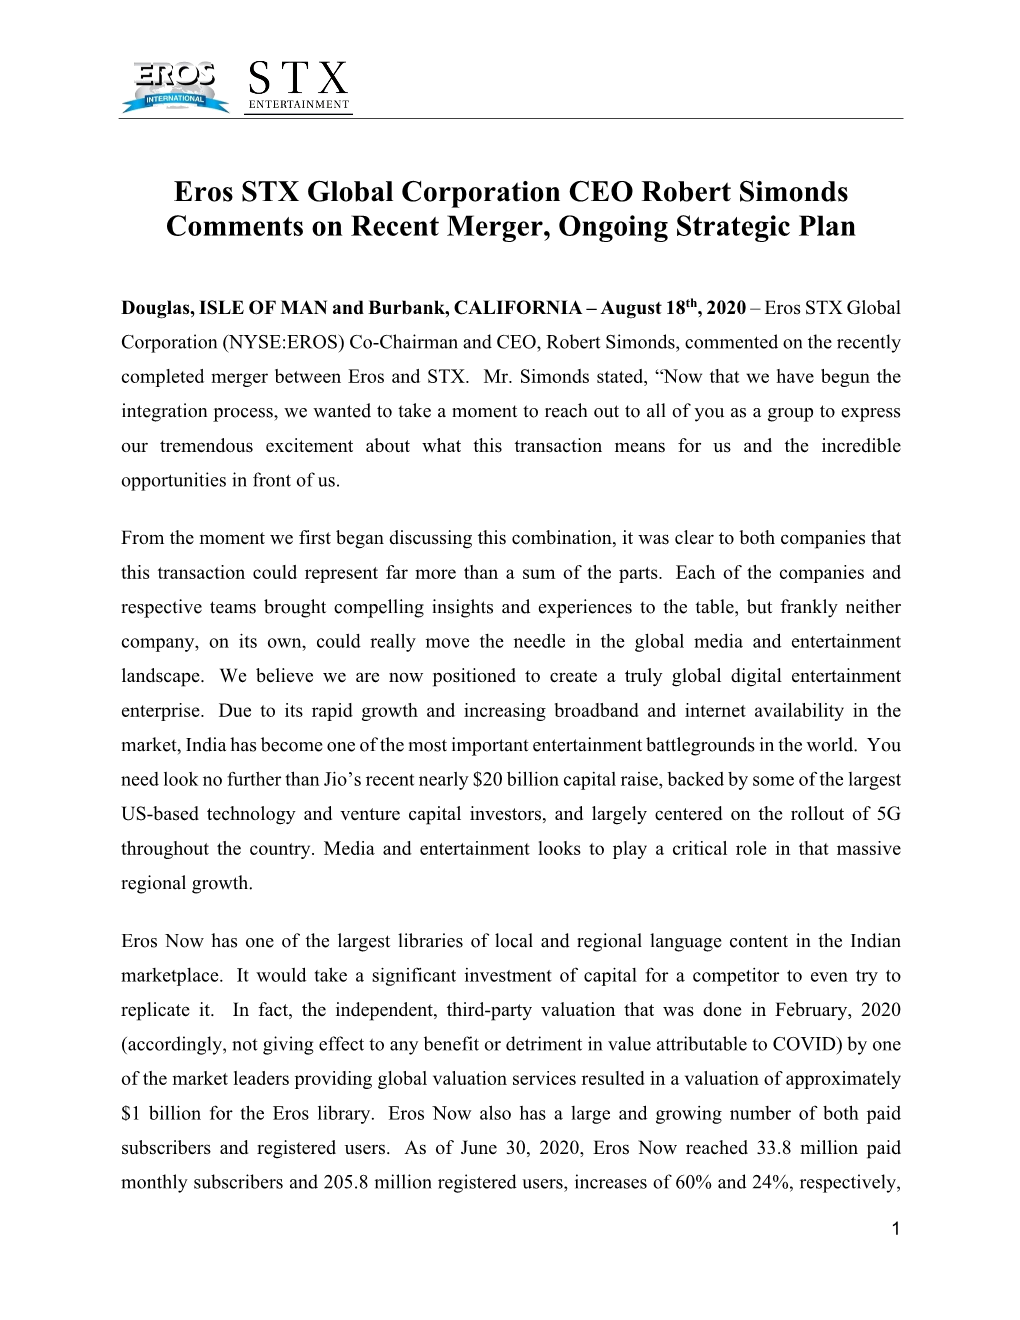 Eros STX Global Corporation CEO Robert Simonds Comments on Recent Merger, Ongoing Strategic Plan